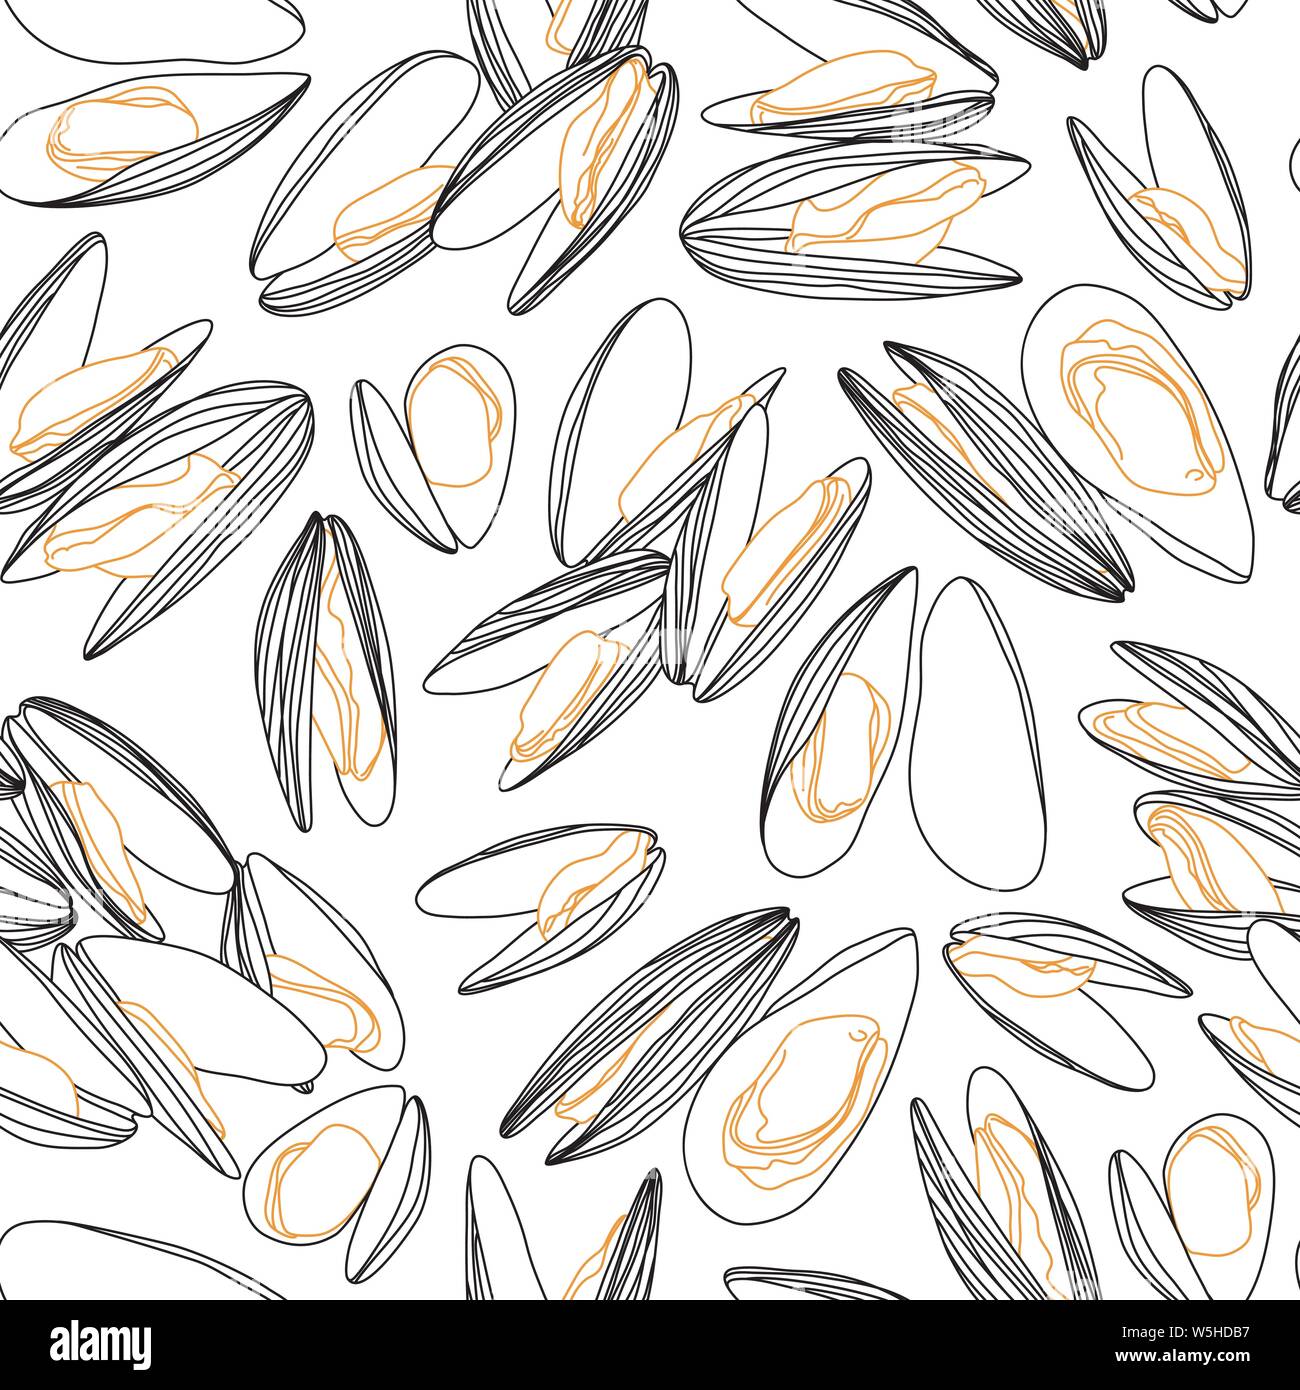 Hand Drawn Mussels Sketch Line Drawing Ornamental Seamless Pattern on White Stock Vector